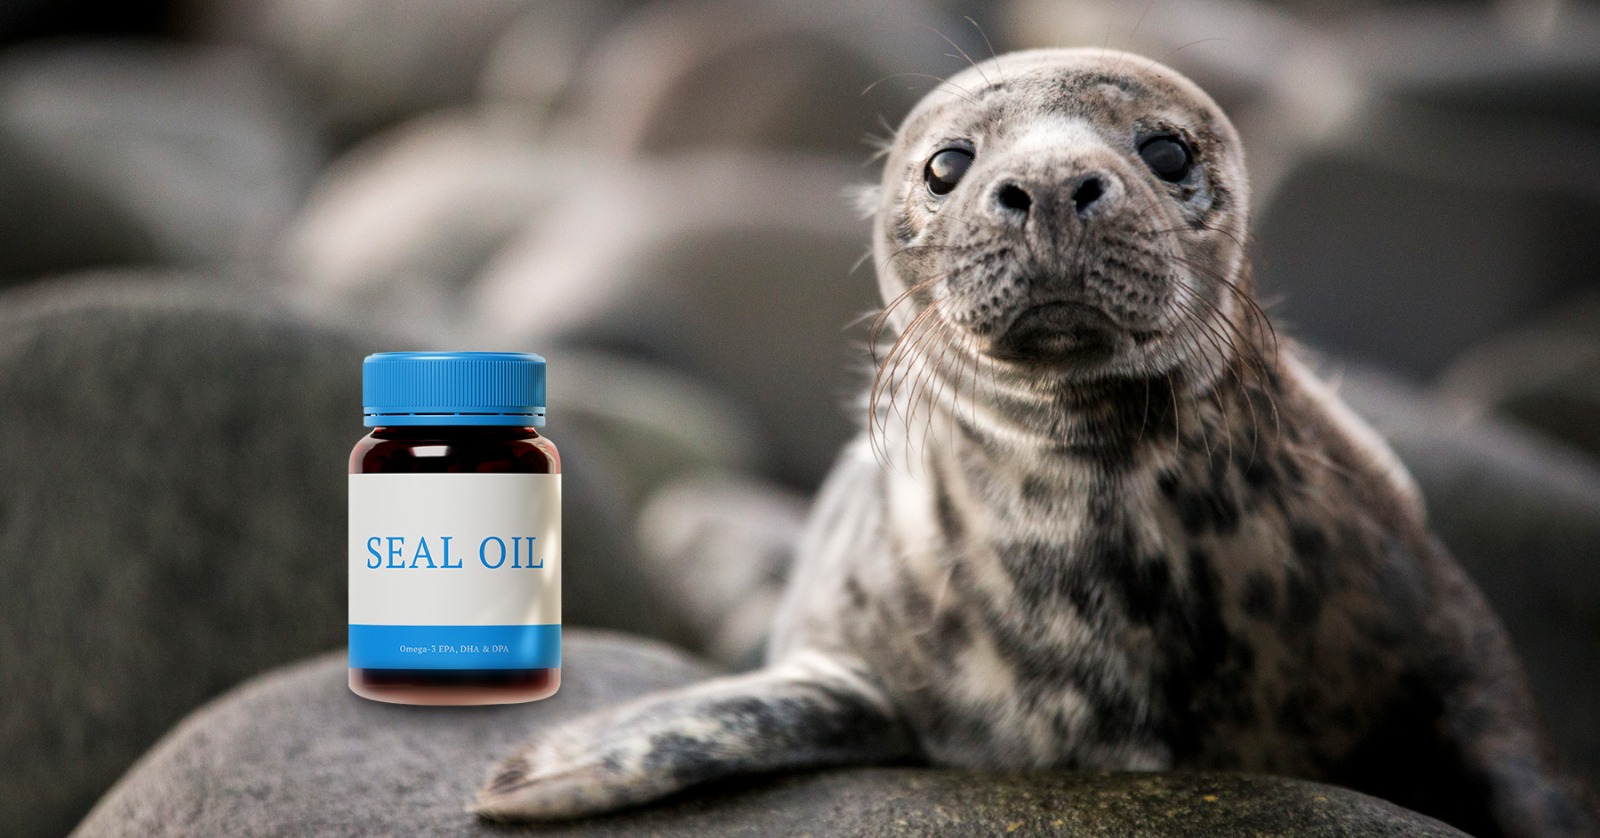 Making an Educated Choice on the Ethics and Un-sustainability of Seal Oil